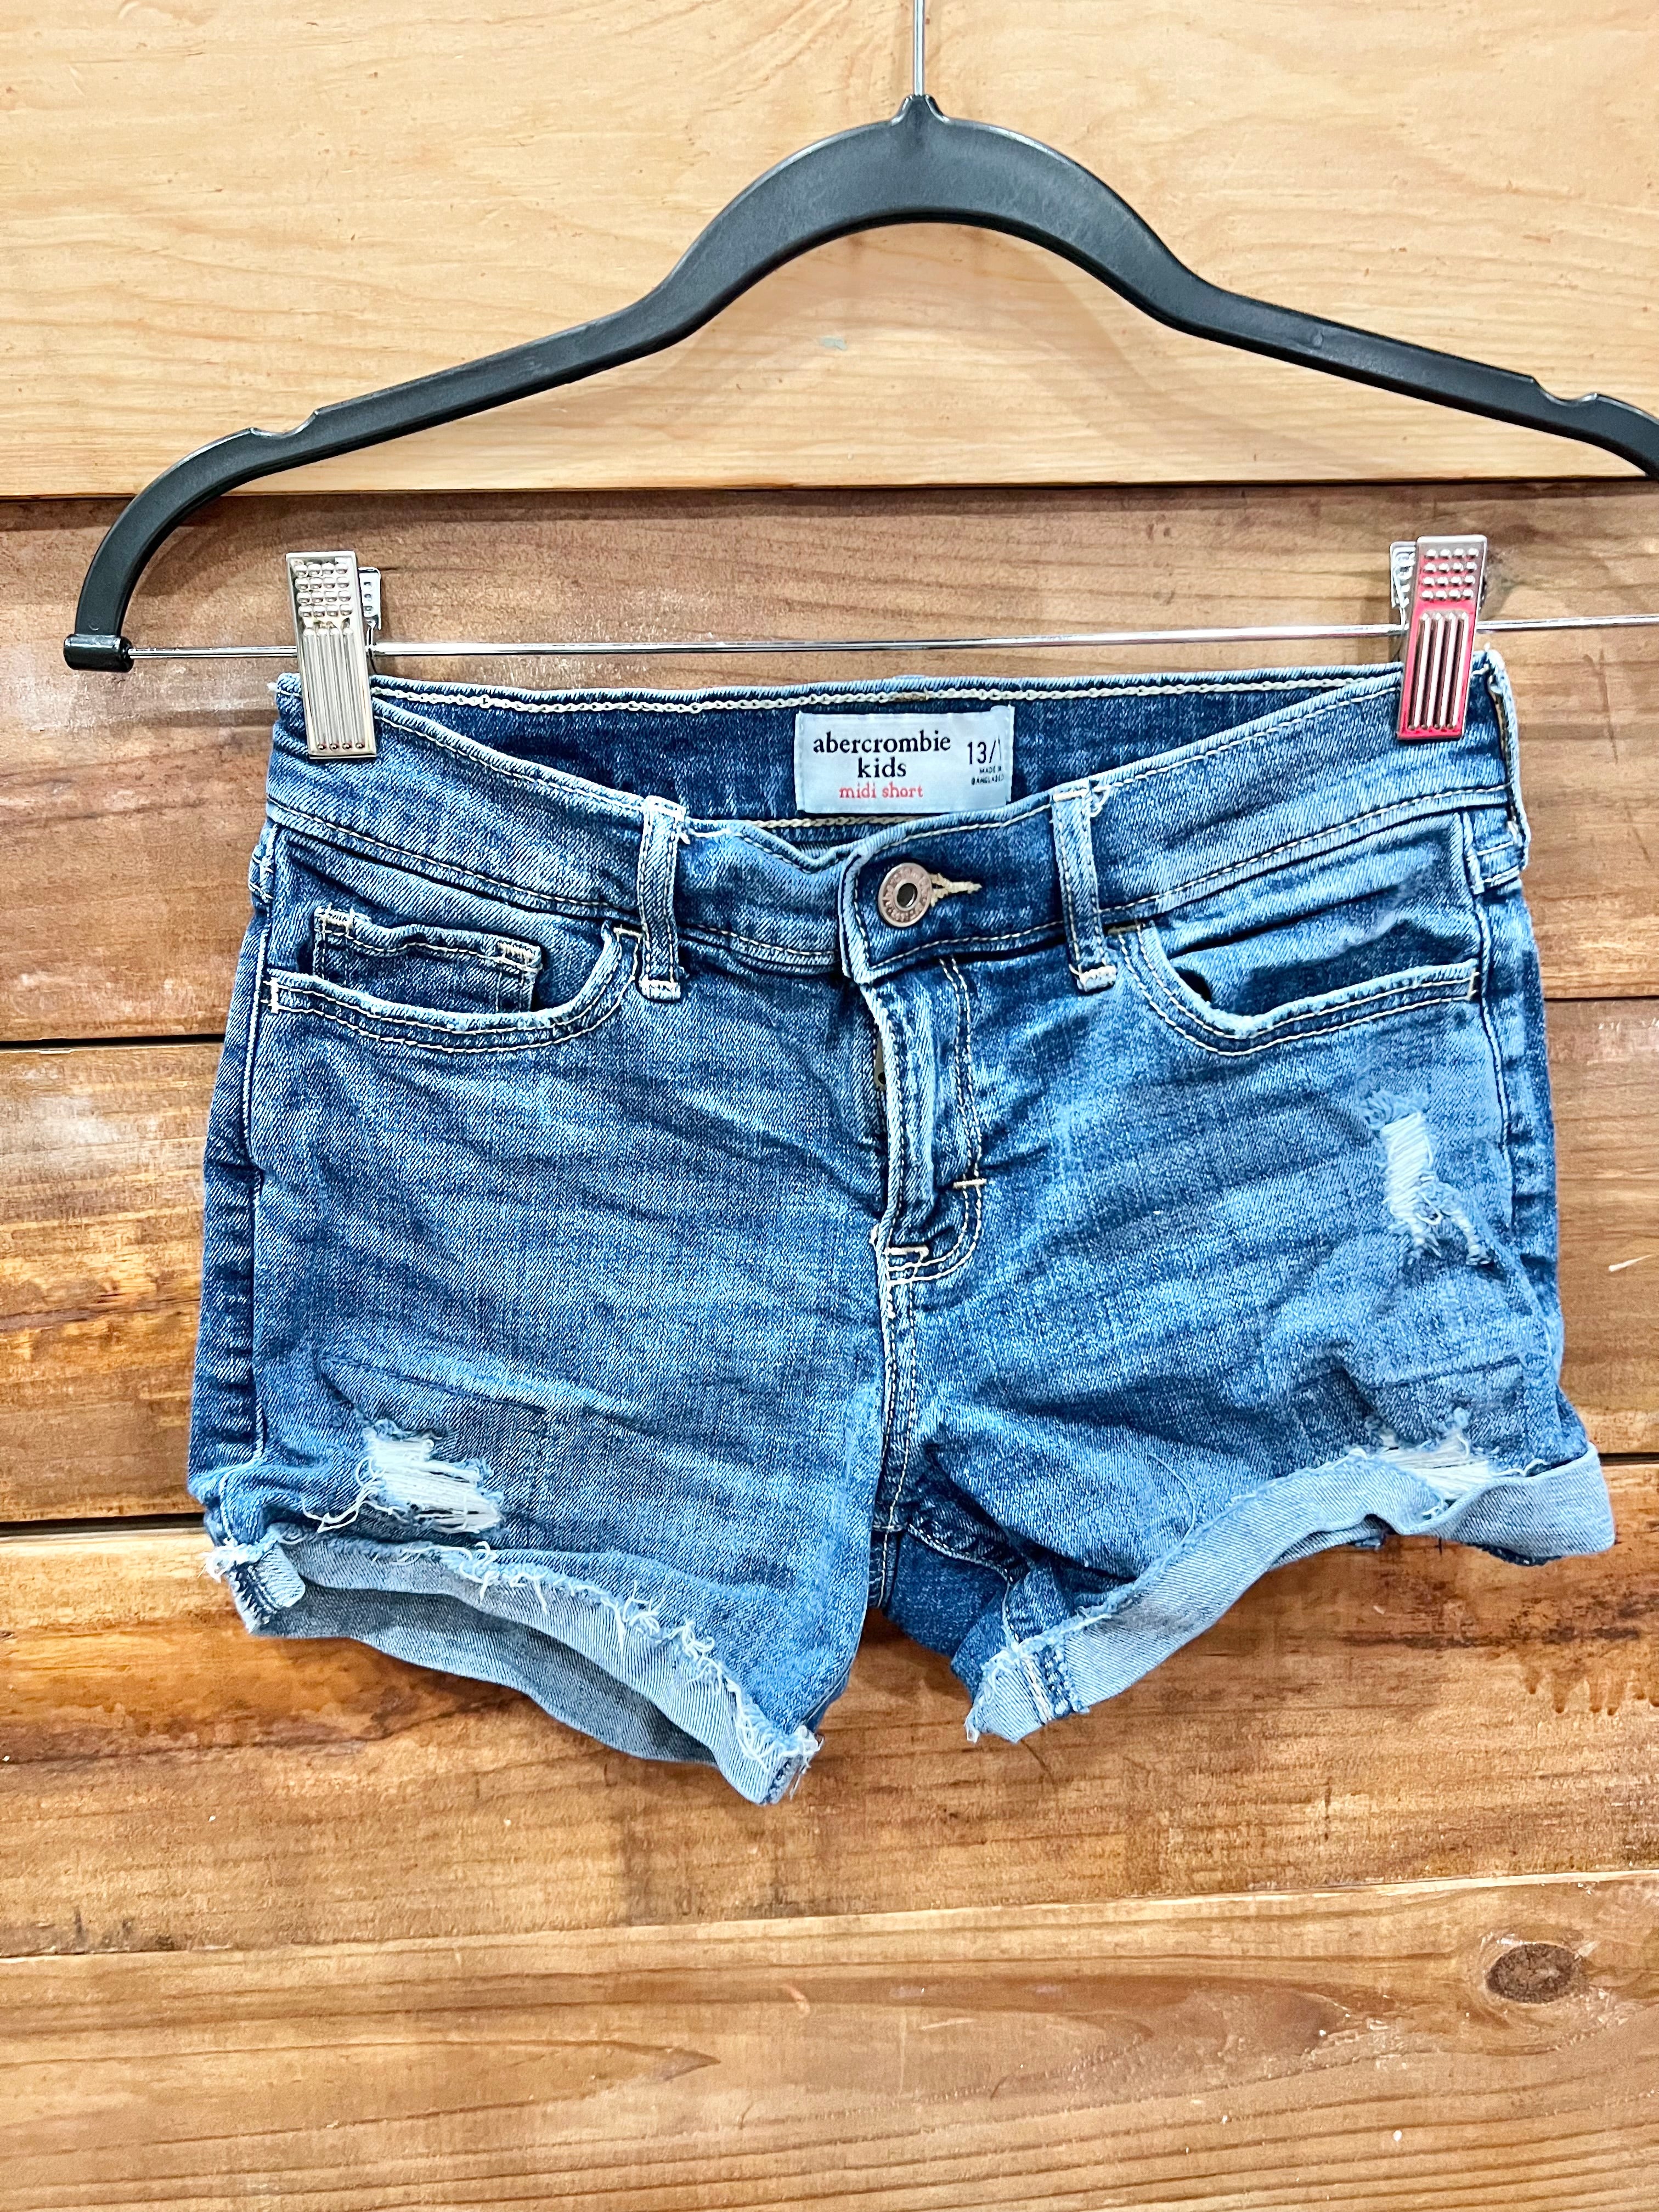 Abercrombie Denim Shorts & Bodysuits - How to choose the right